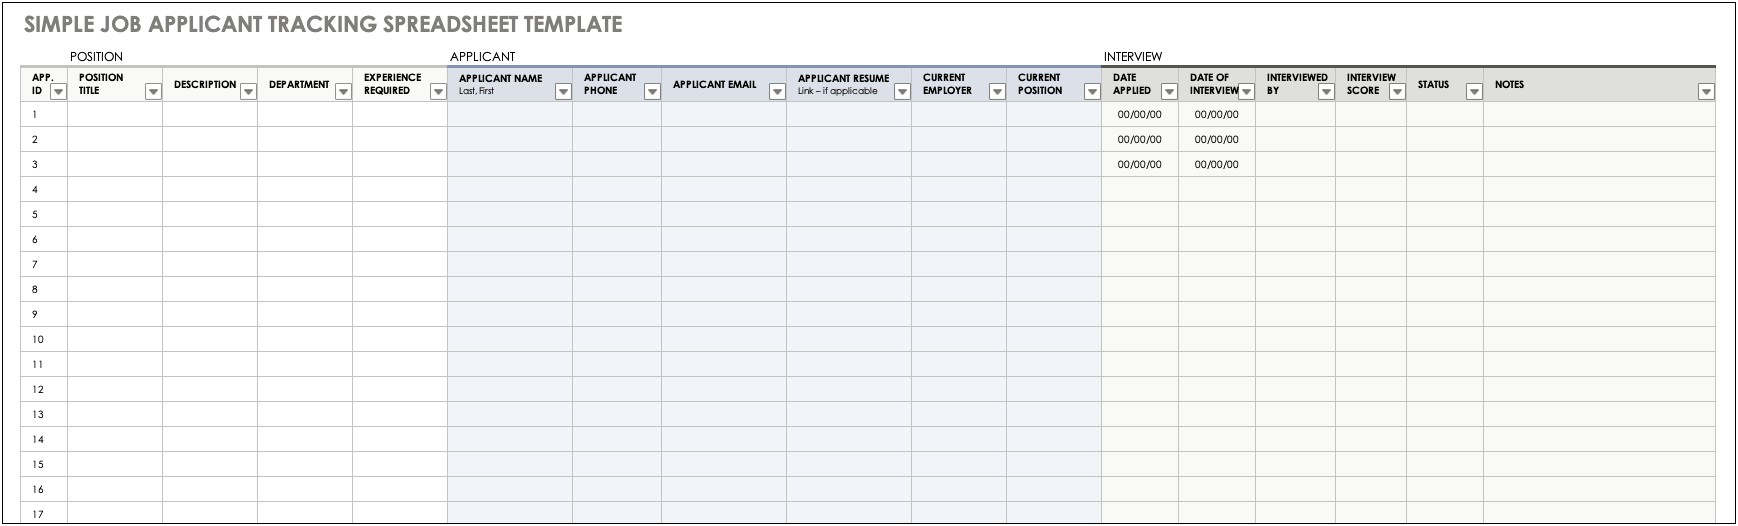 Recruitment Manager Excel Template Free Download